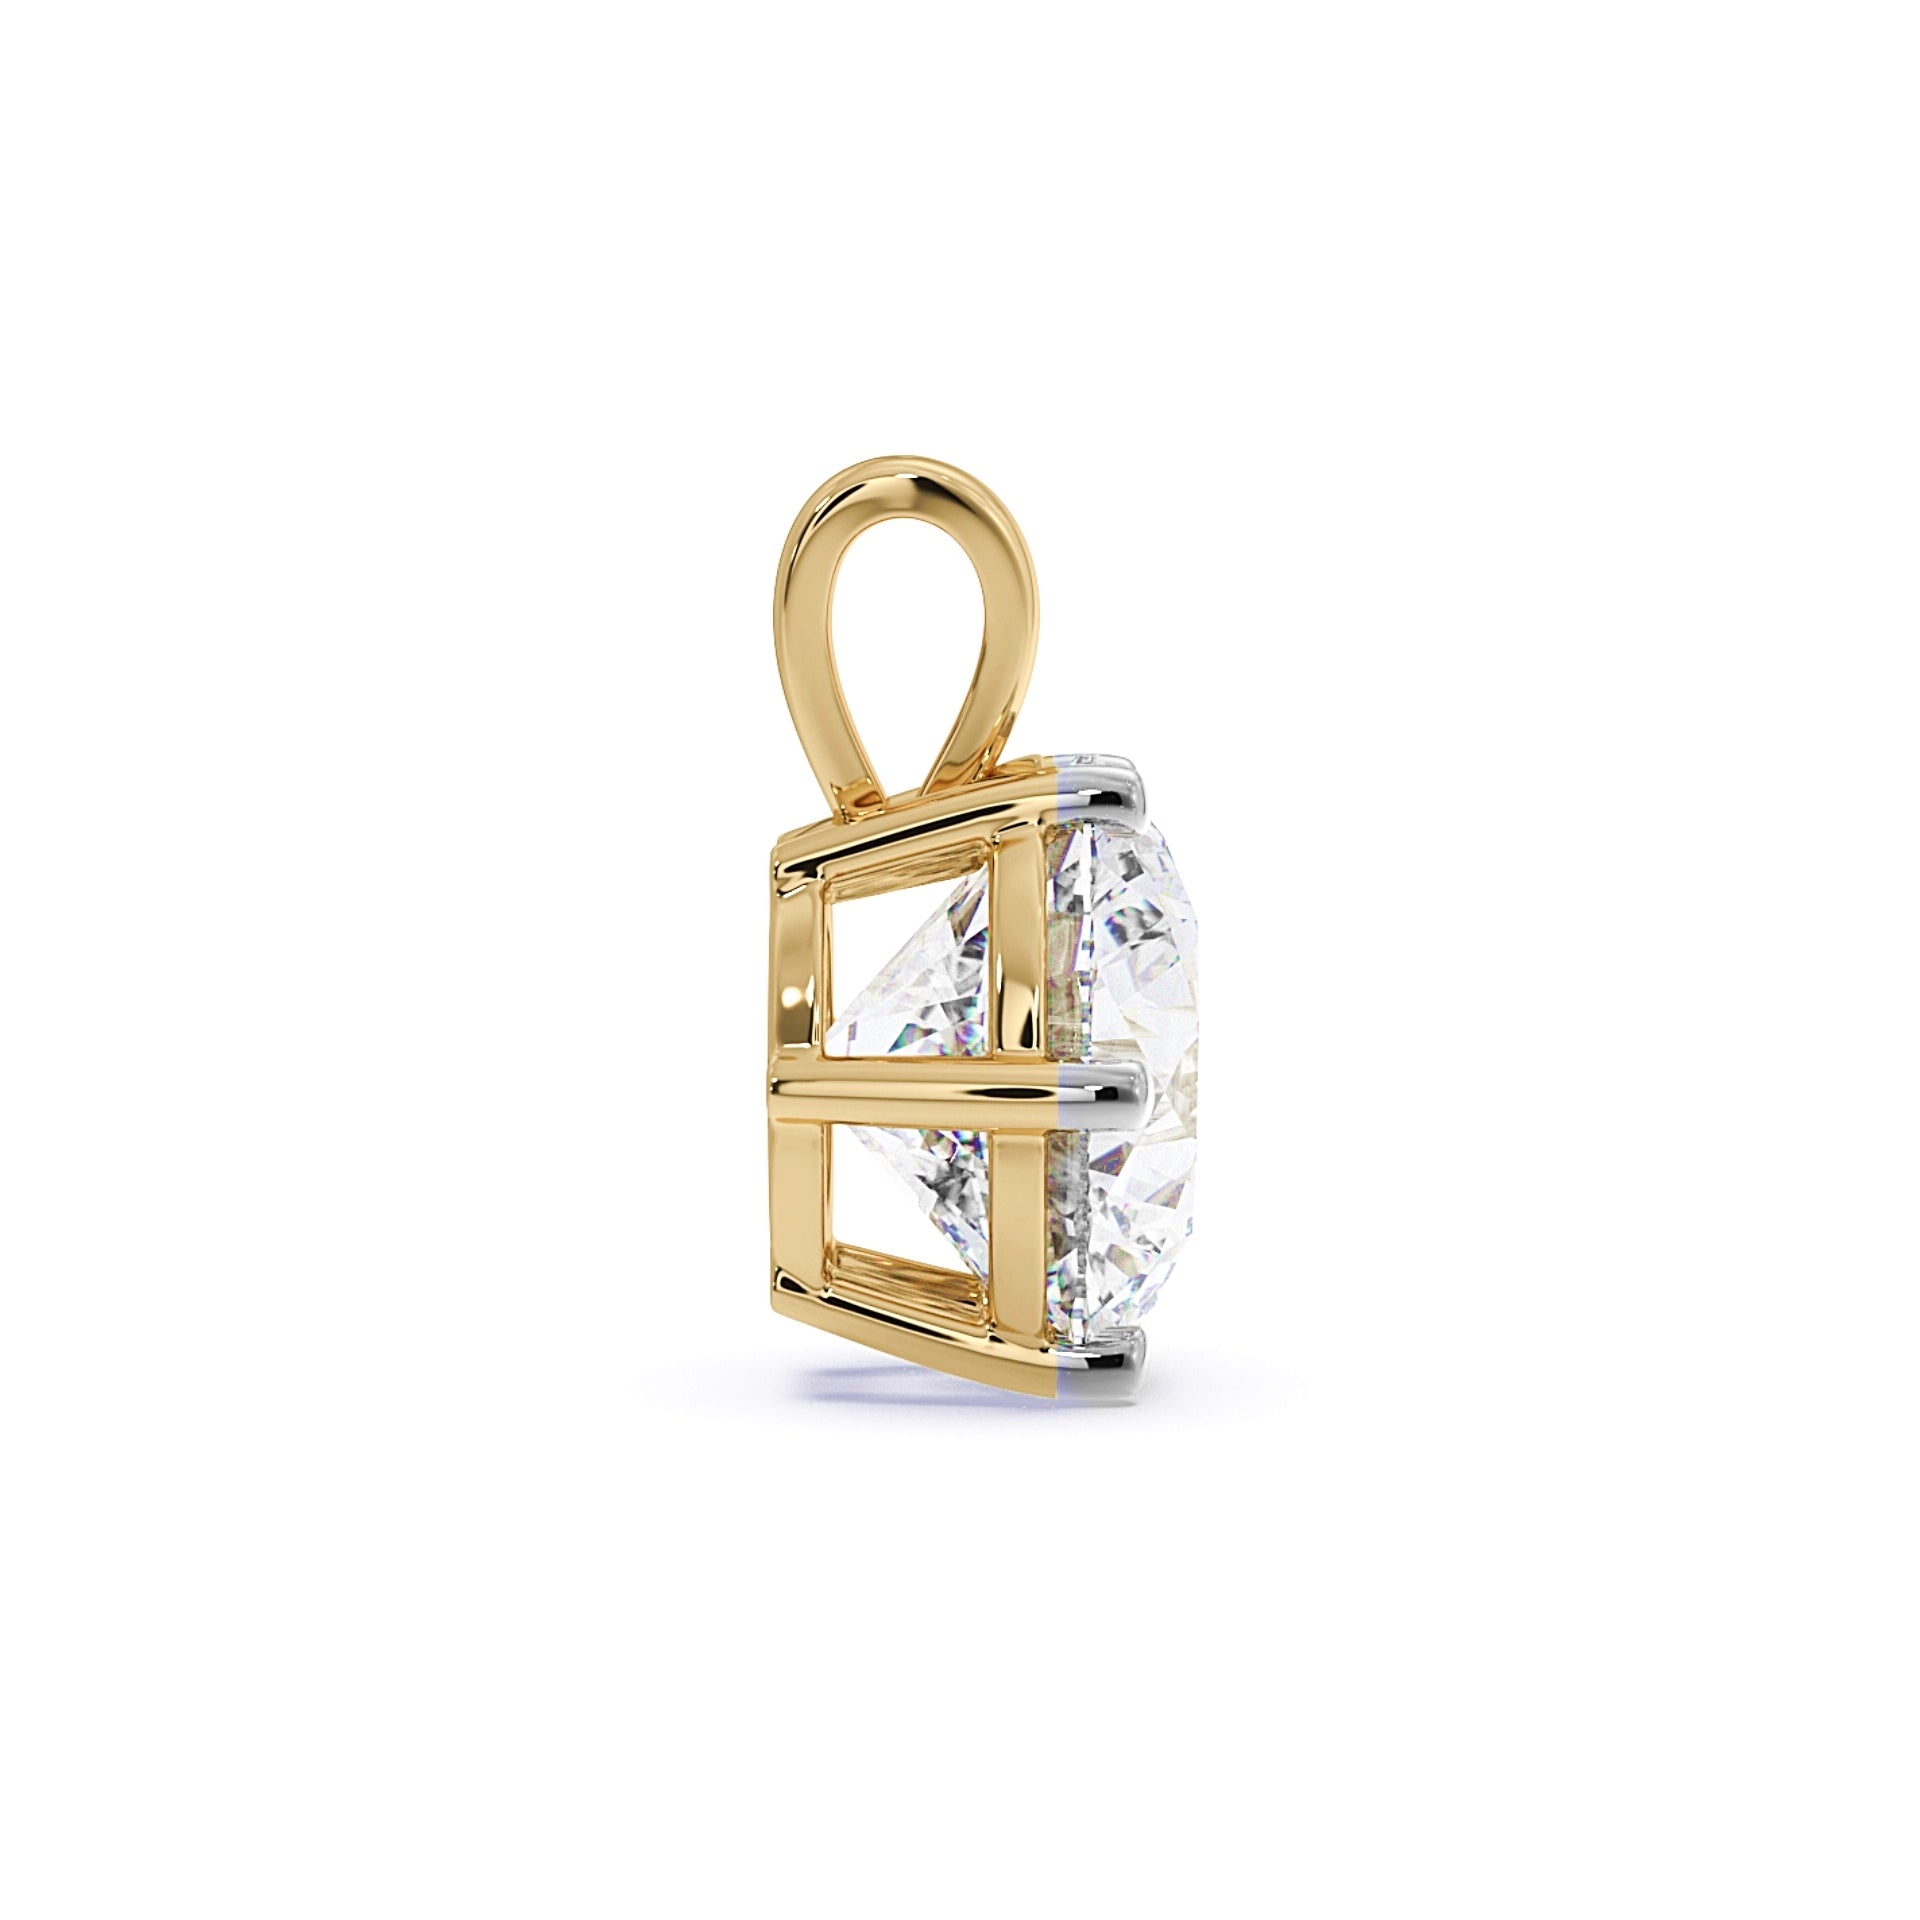 Side view of MYZA 1 carat IGI certified lab-grown diamond Pendant for women delicately set in secure six-prong settings crafted in 18kt hallmark yellow gold.